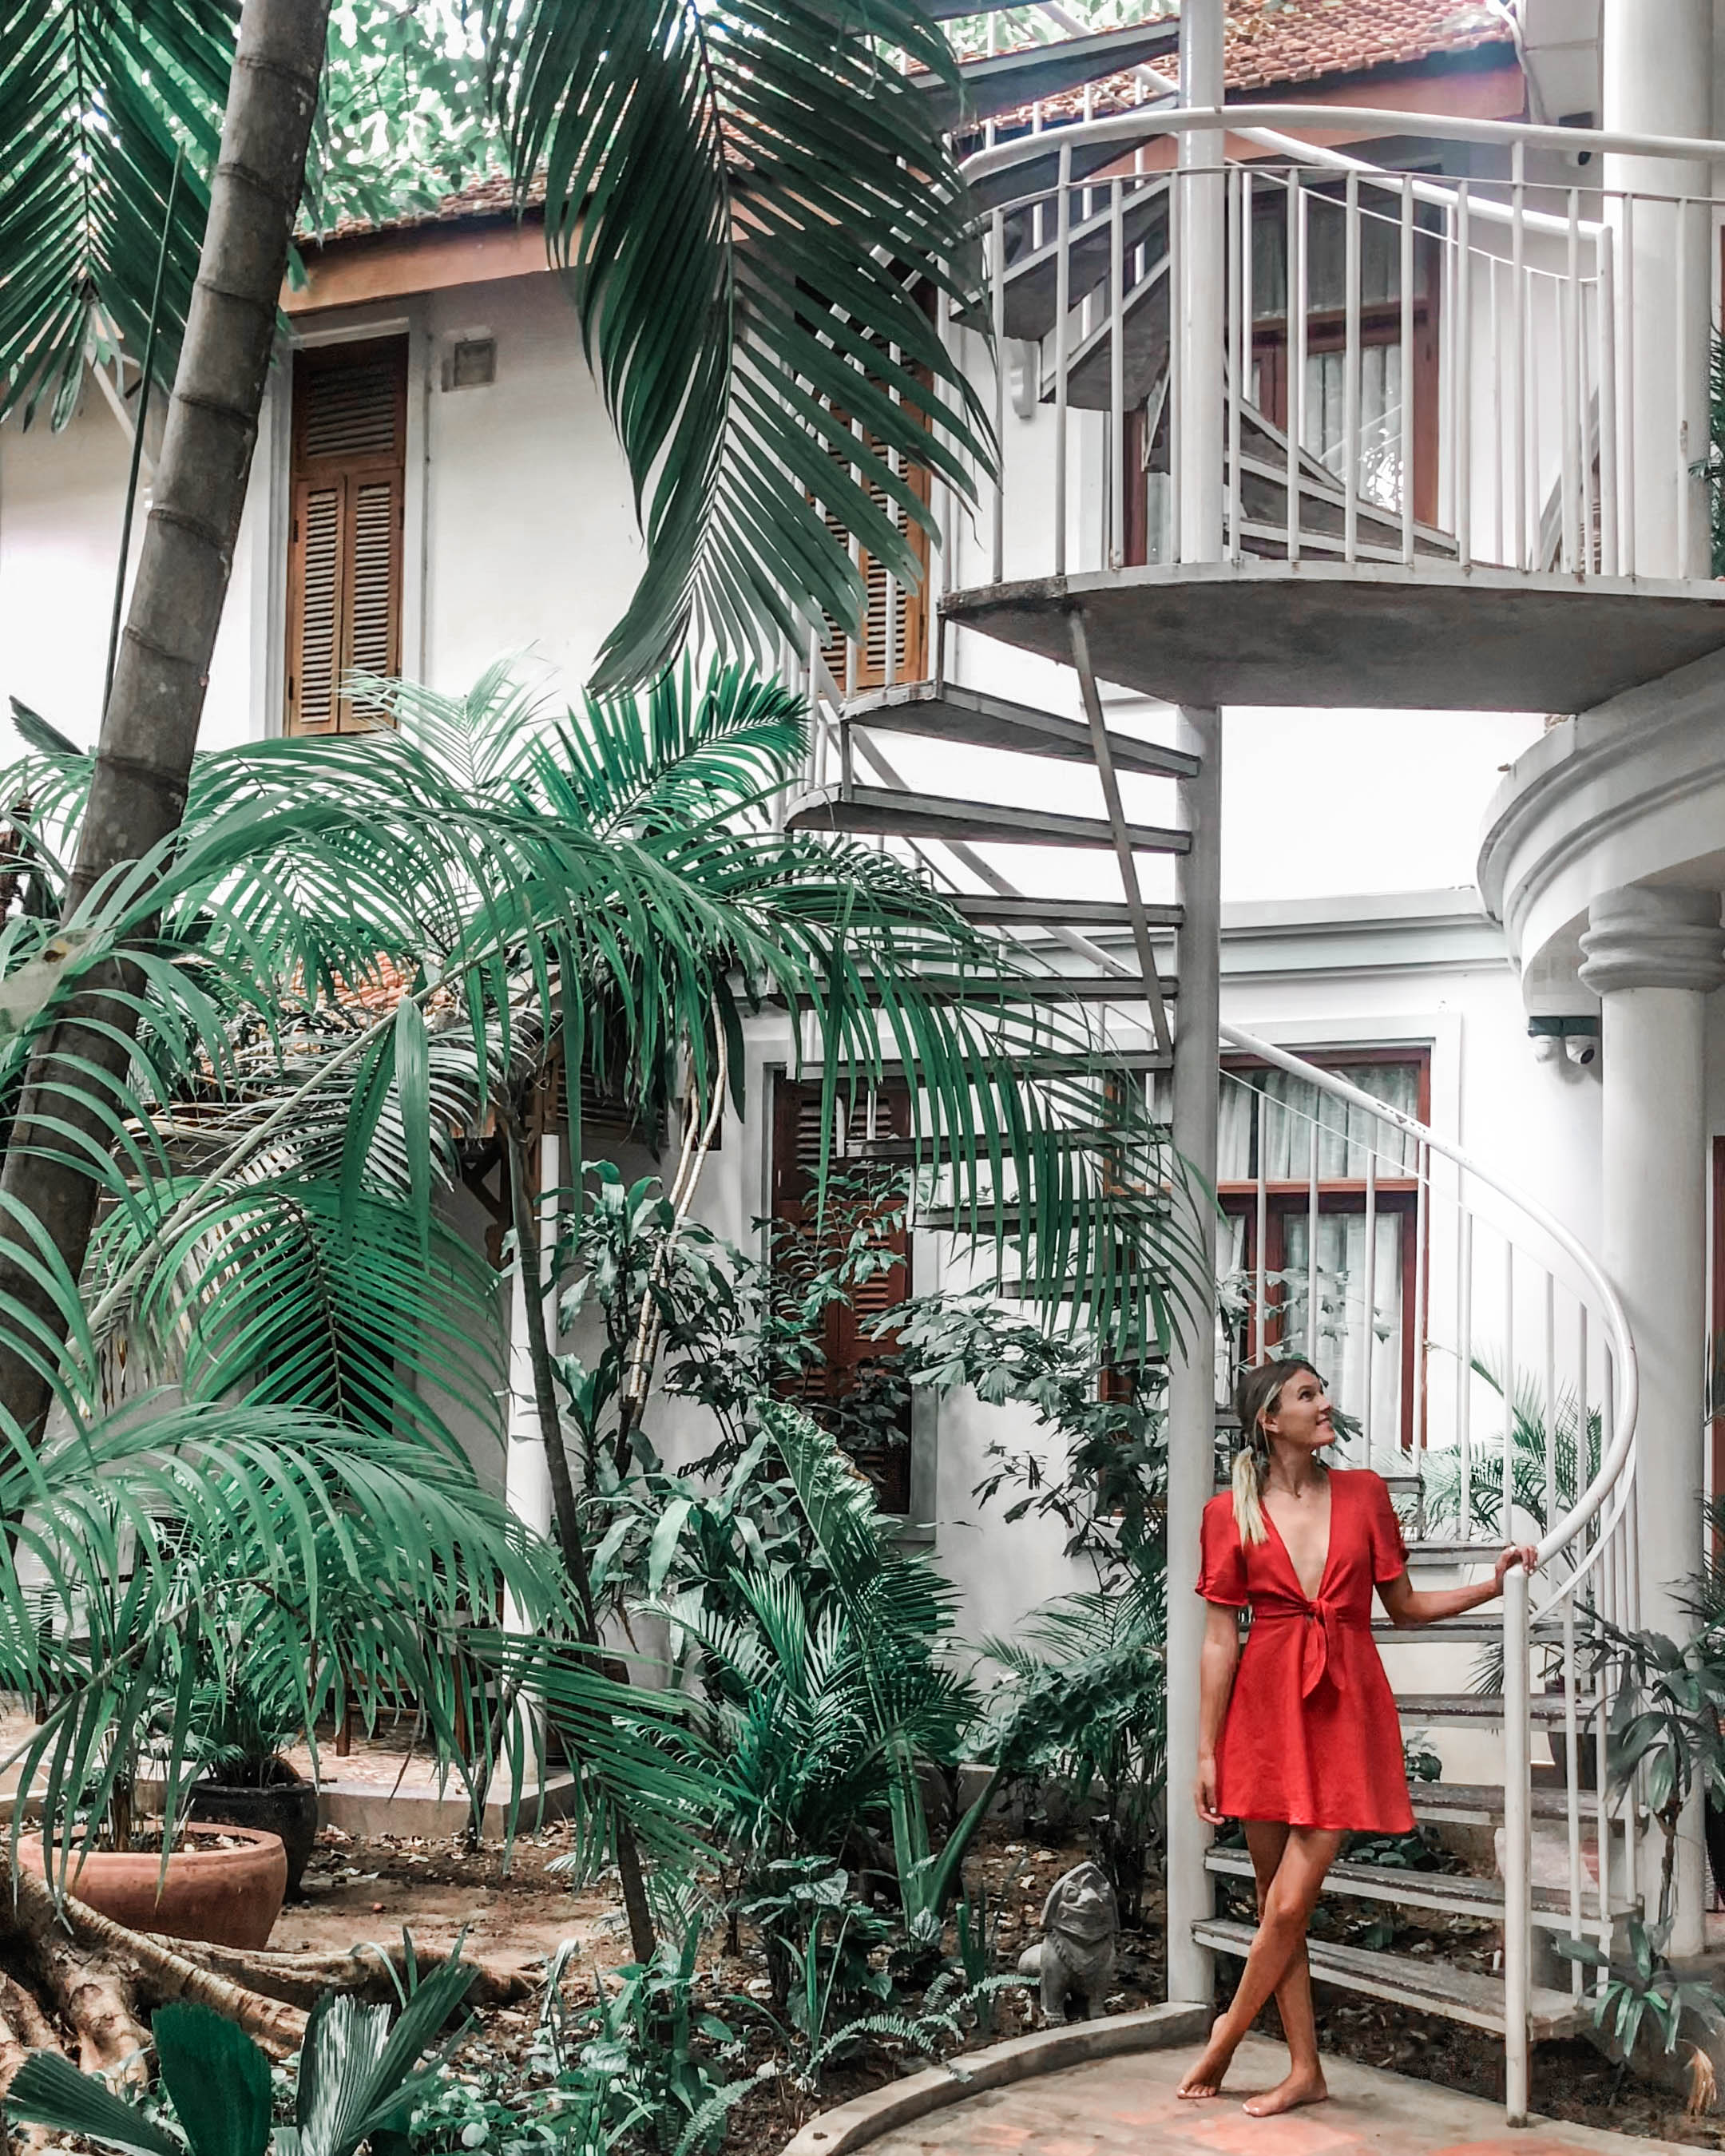 PENH HOUSE AND JUNGLE ADDITION - Instagram